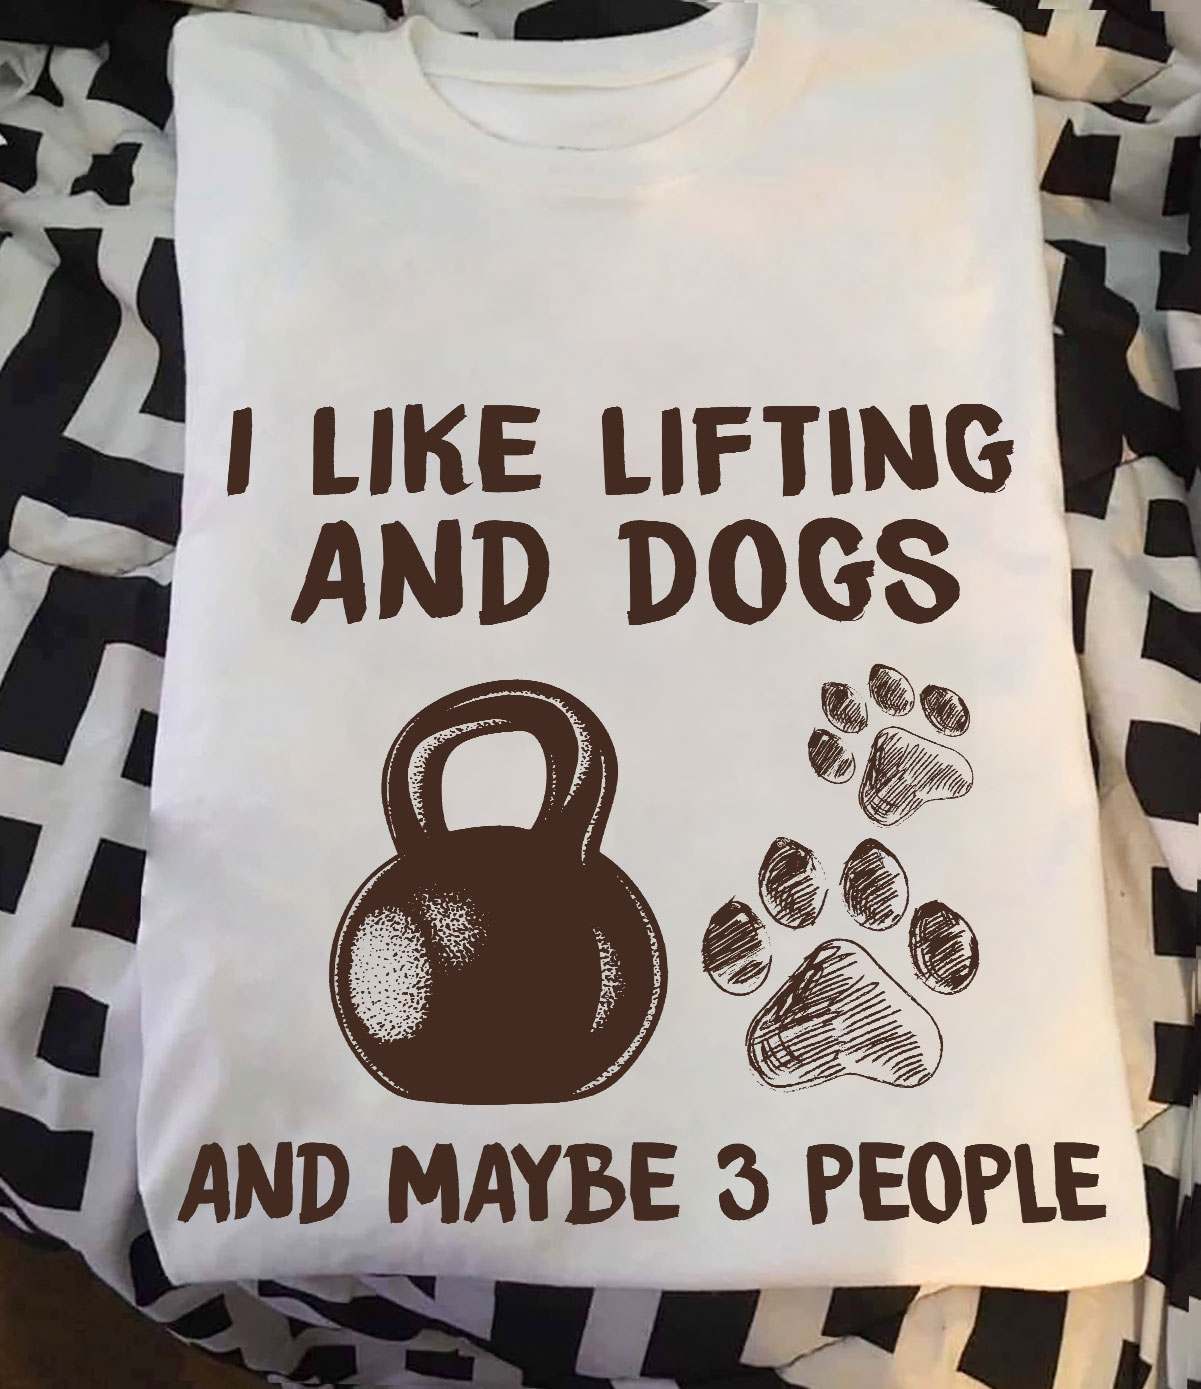 I like lifting and dogs and maybe 3 people - Love lifting